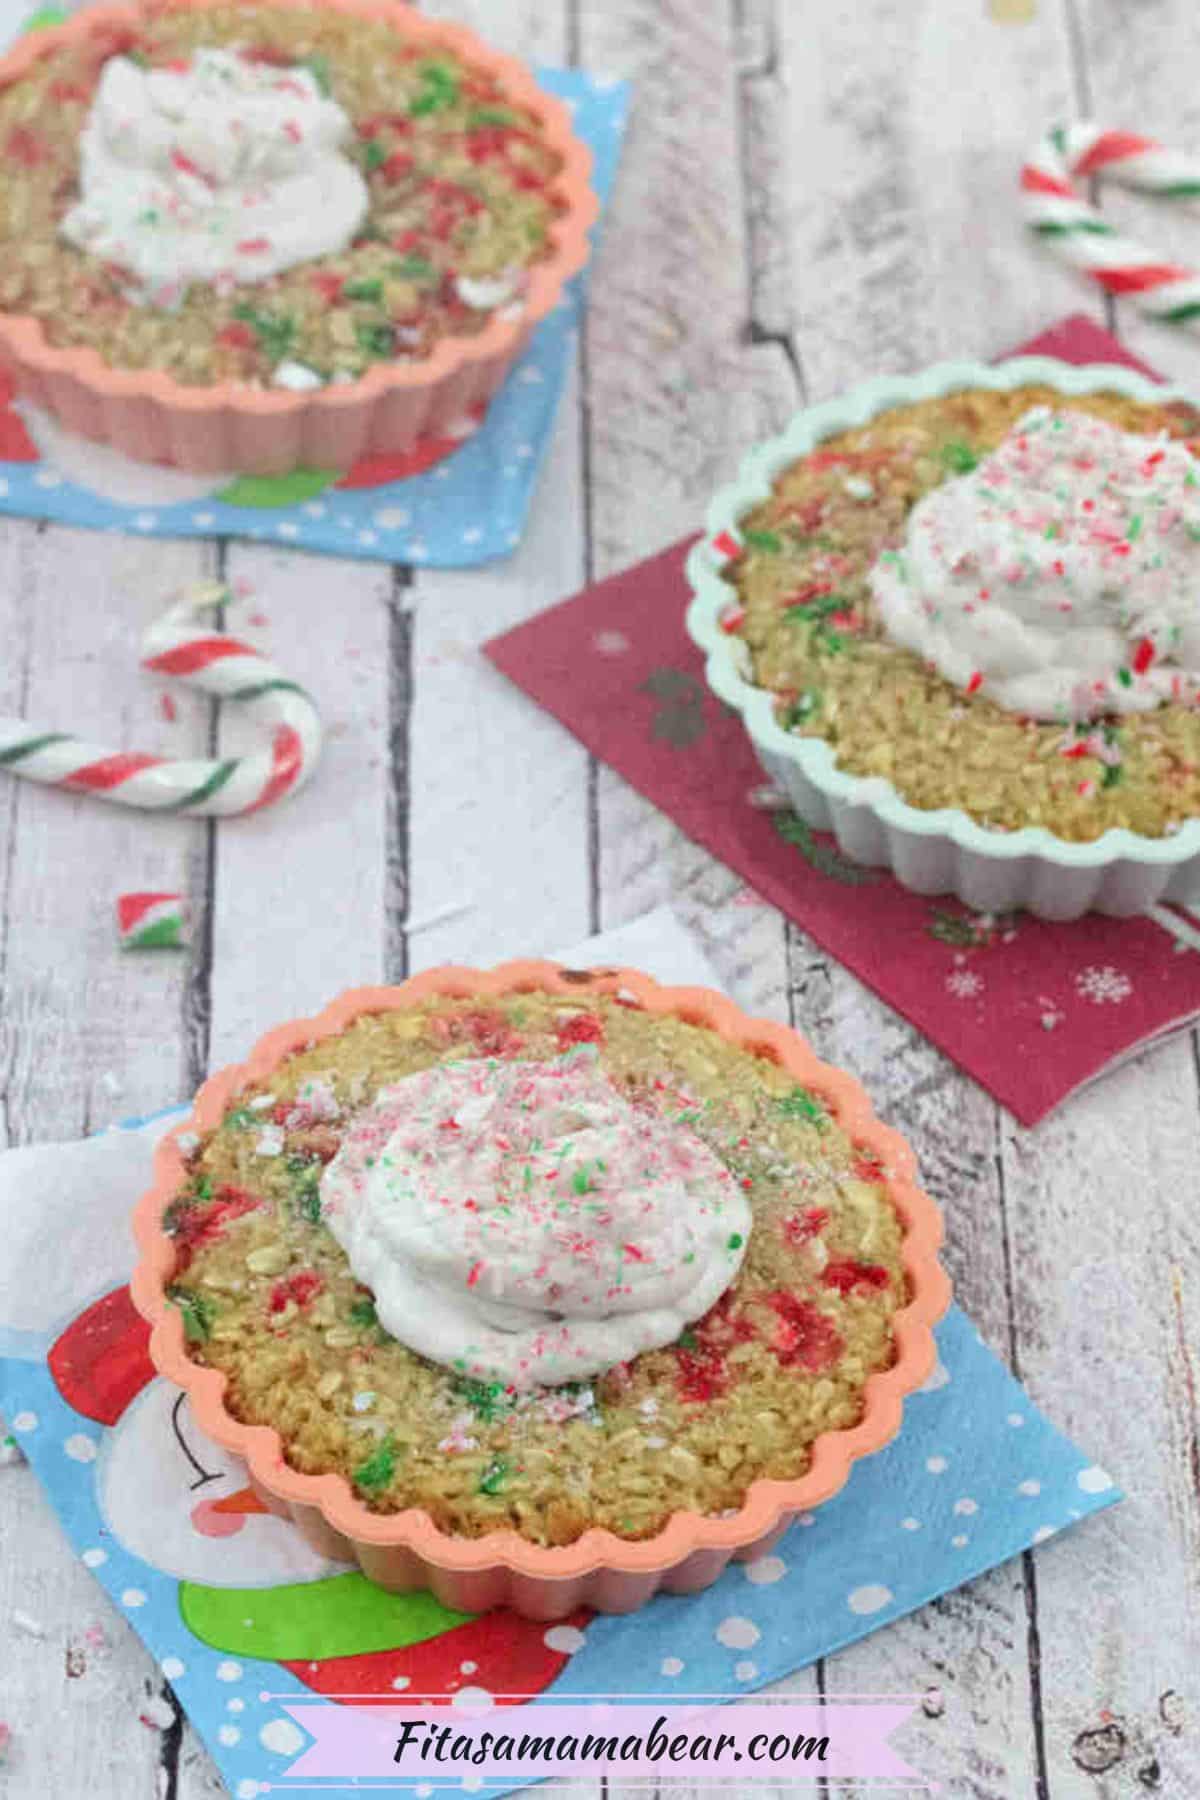 Candy cane baked oatmeal with coconut whipped cream in a orange mold on a blue napkin and more oatmeal and candy canes around it.